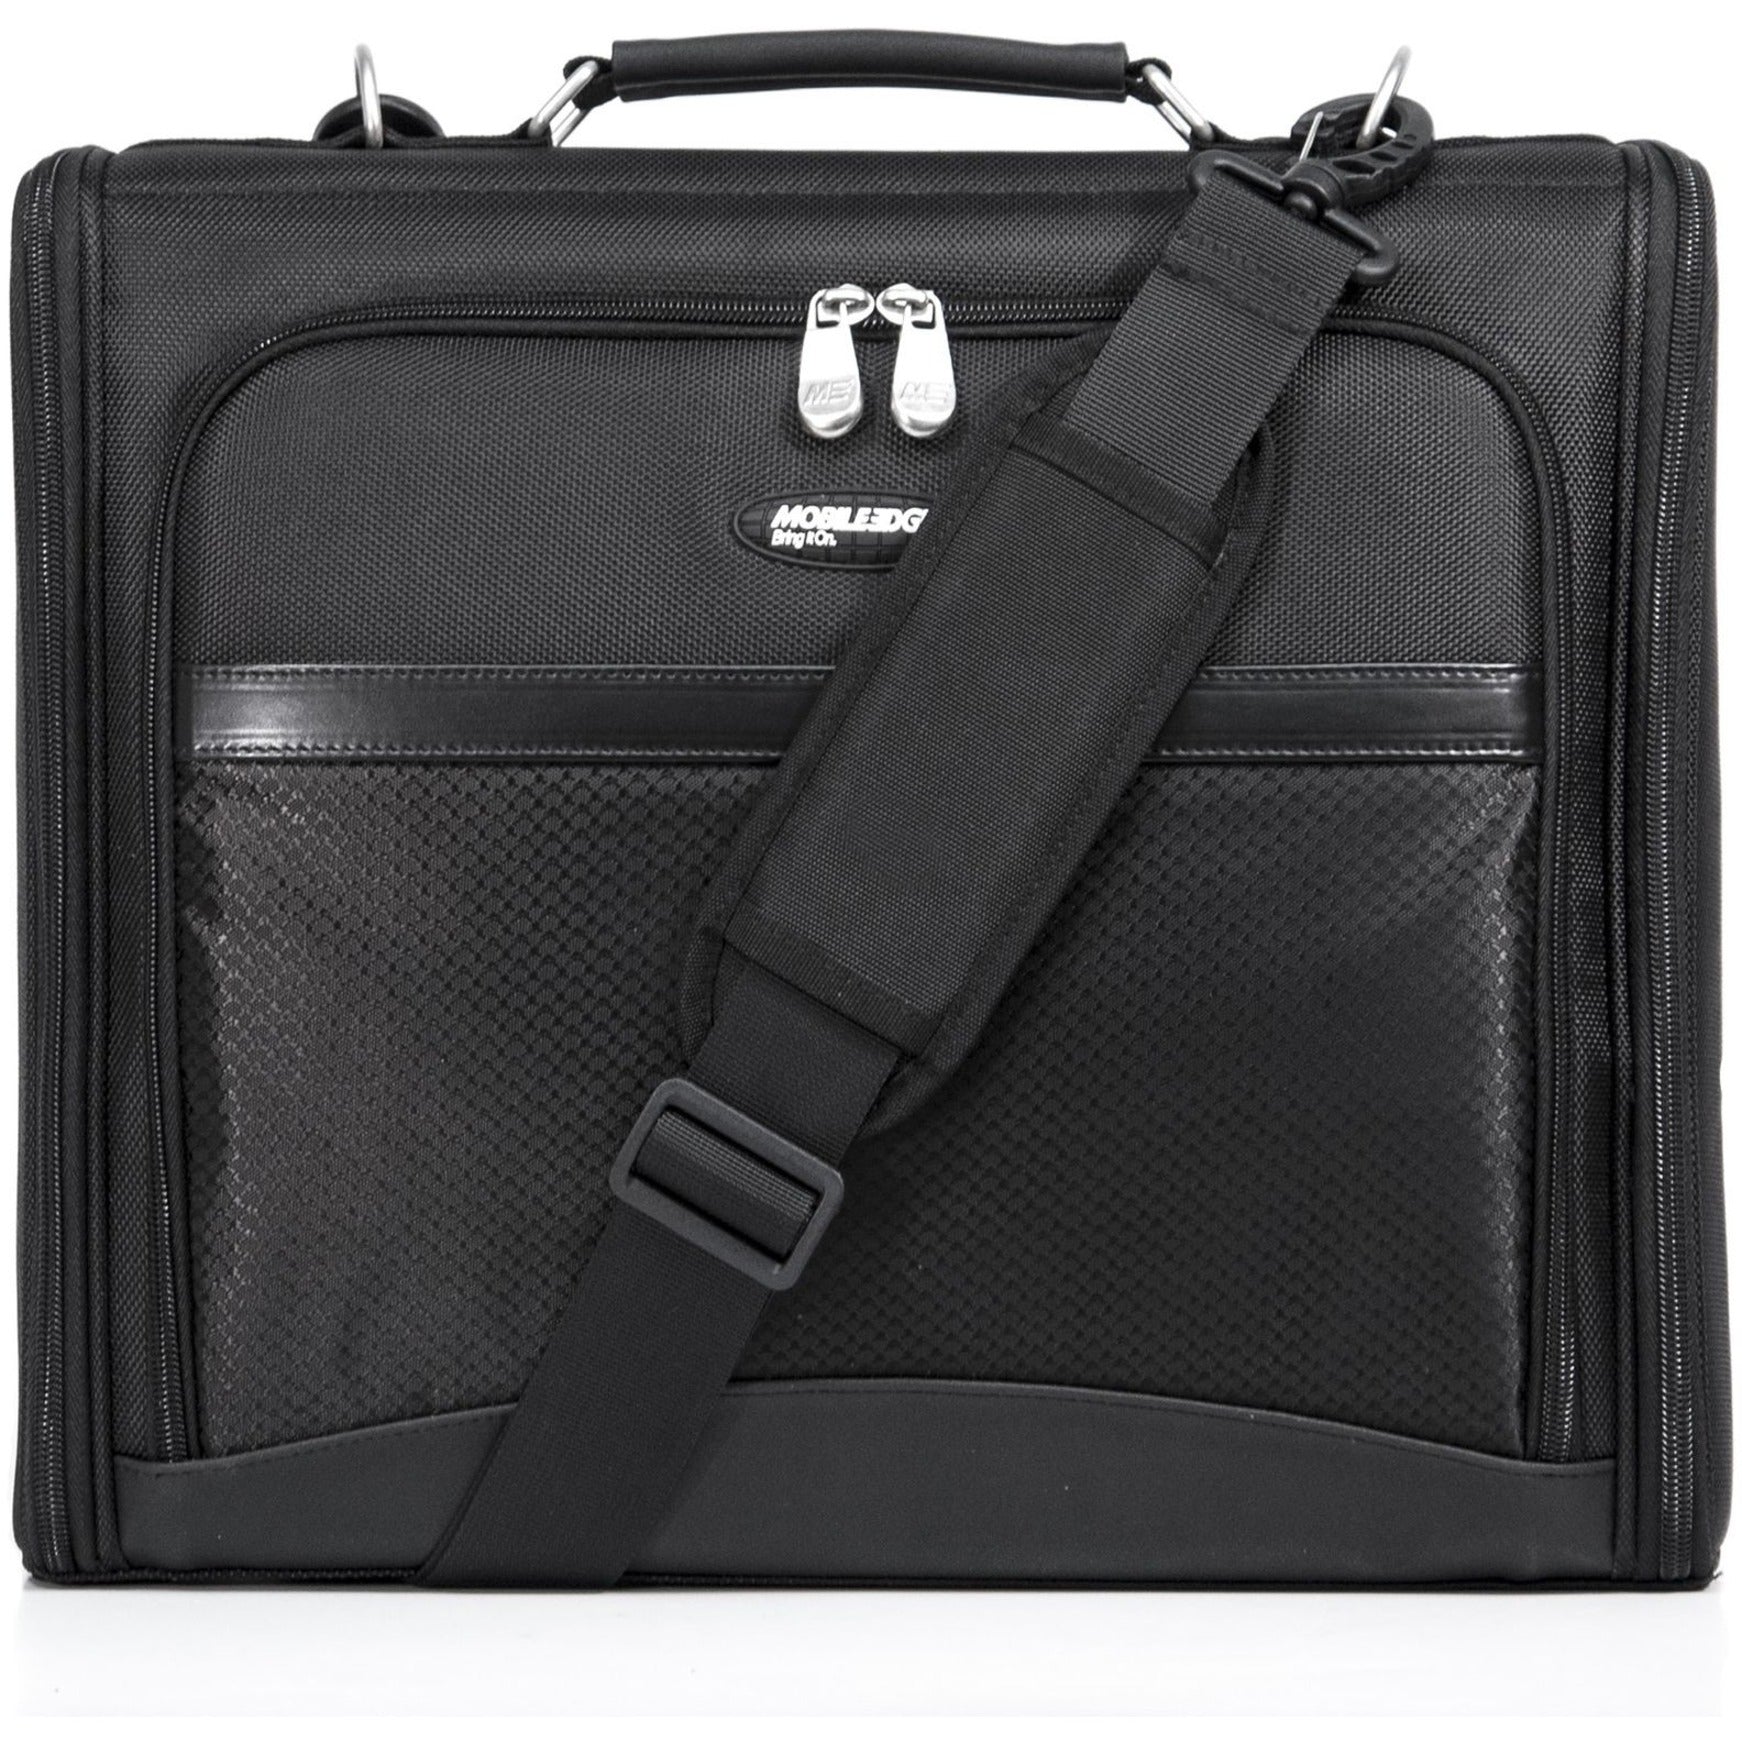 Mobile Edge Express Carrying Case for 11.6" Chromebook - Black [Discontinued]